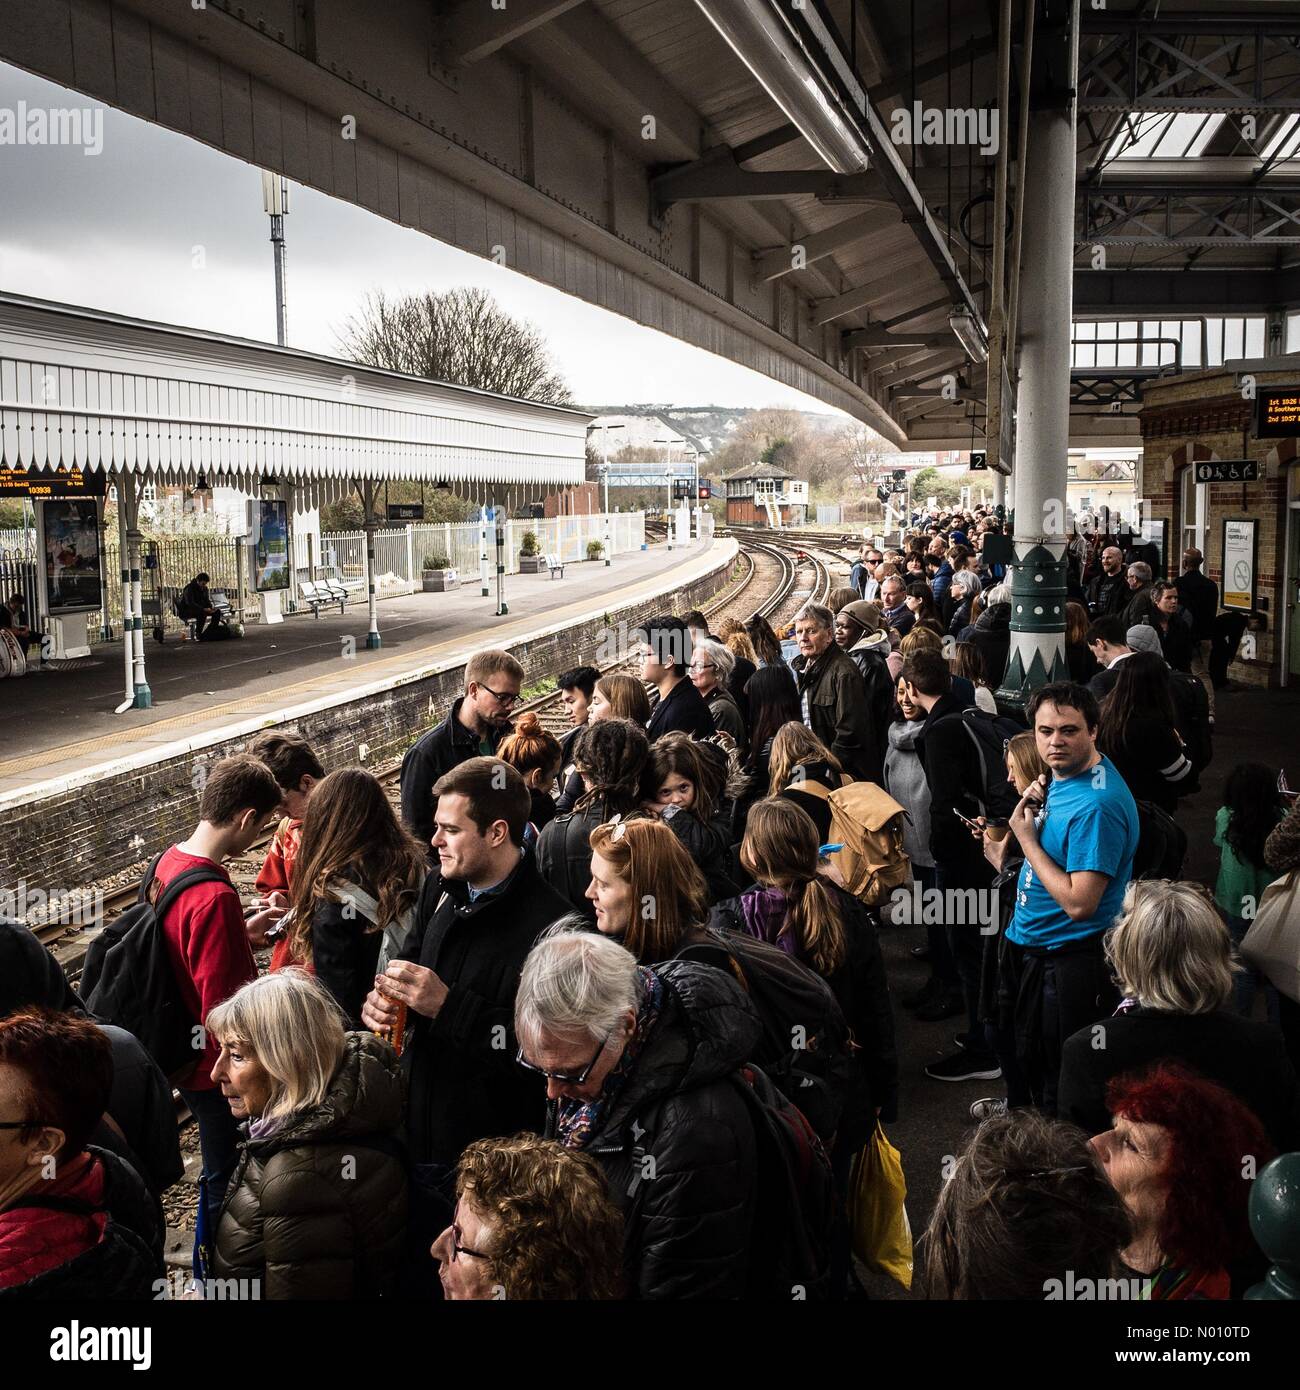 Lewes, E Sussex, UK. 23rd March, 2019. Crowds at Lewies rail station on 23/03/2019.Many were travelling from Brighton to an anti brexit March having been diverted via Lewes due to engineering works on the mainline. Credit: Julie Edwards/StockimoNews/Alamy Live News Credit: Julie Edwards/StockimoNews/Alamy Live News Stock Photo